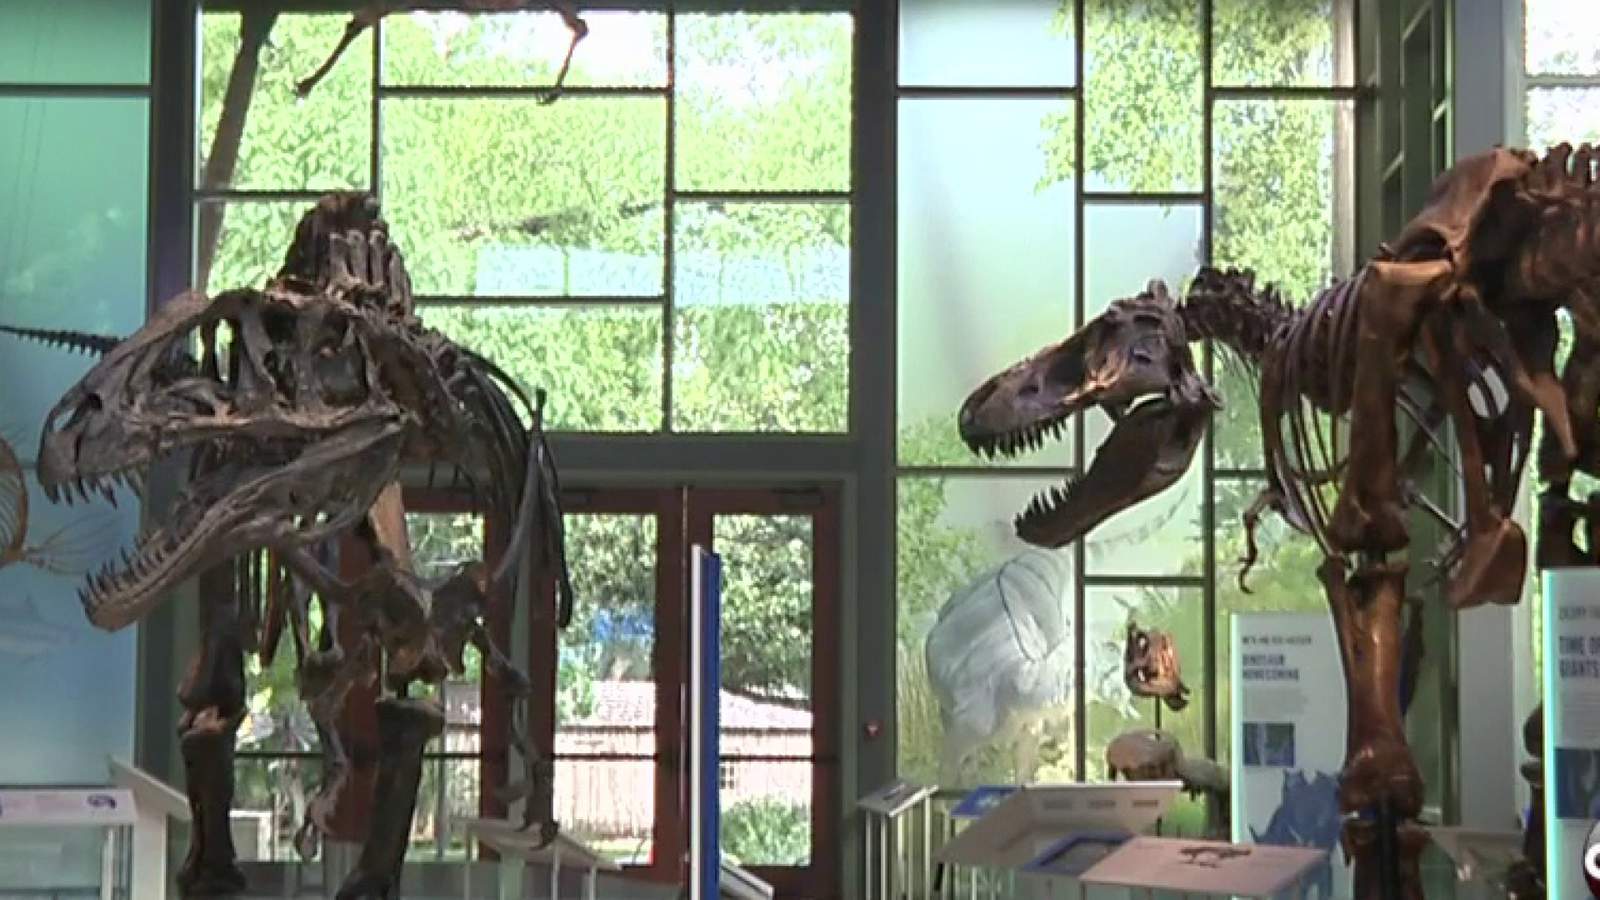 Witte Museum reopening later this month with safety guidelines